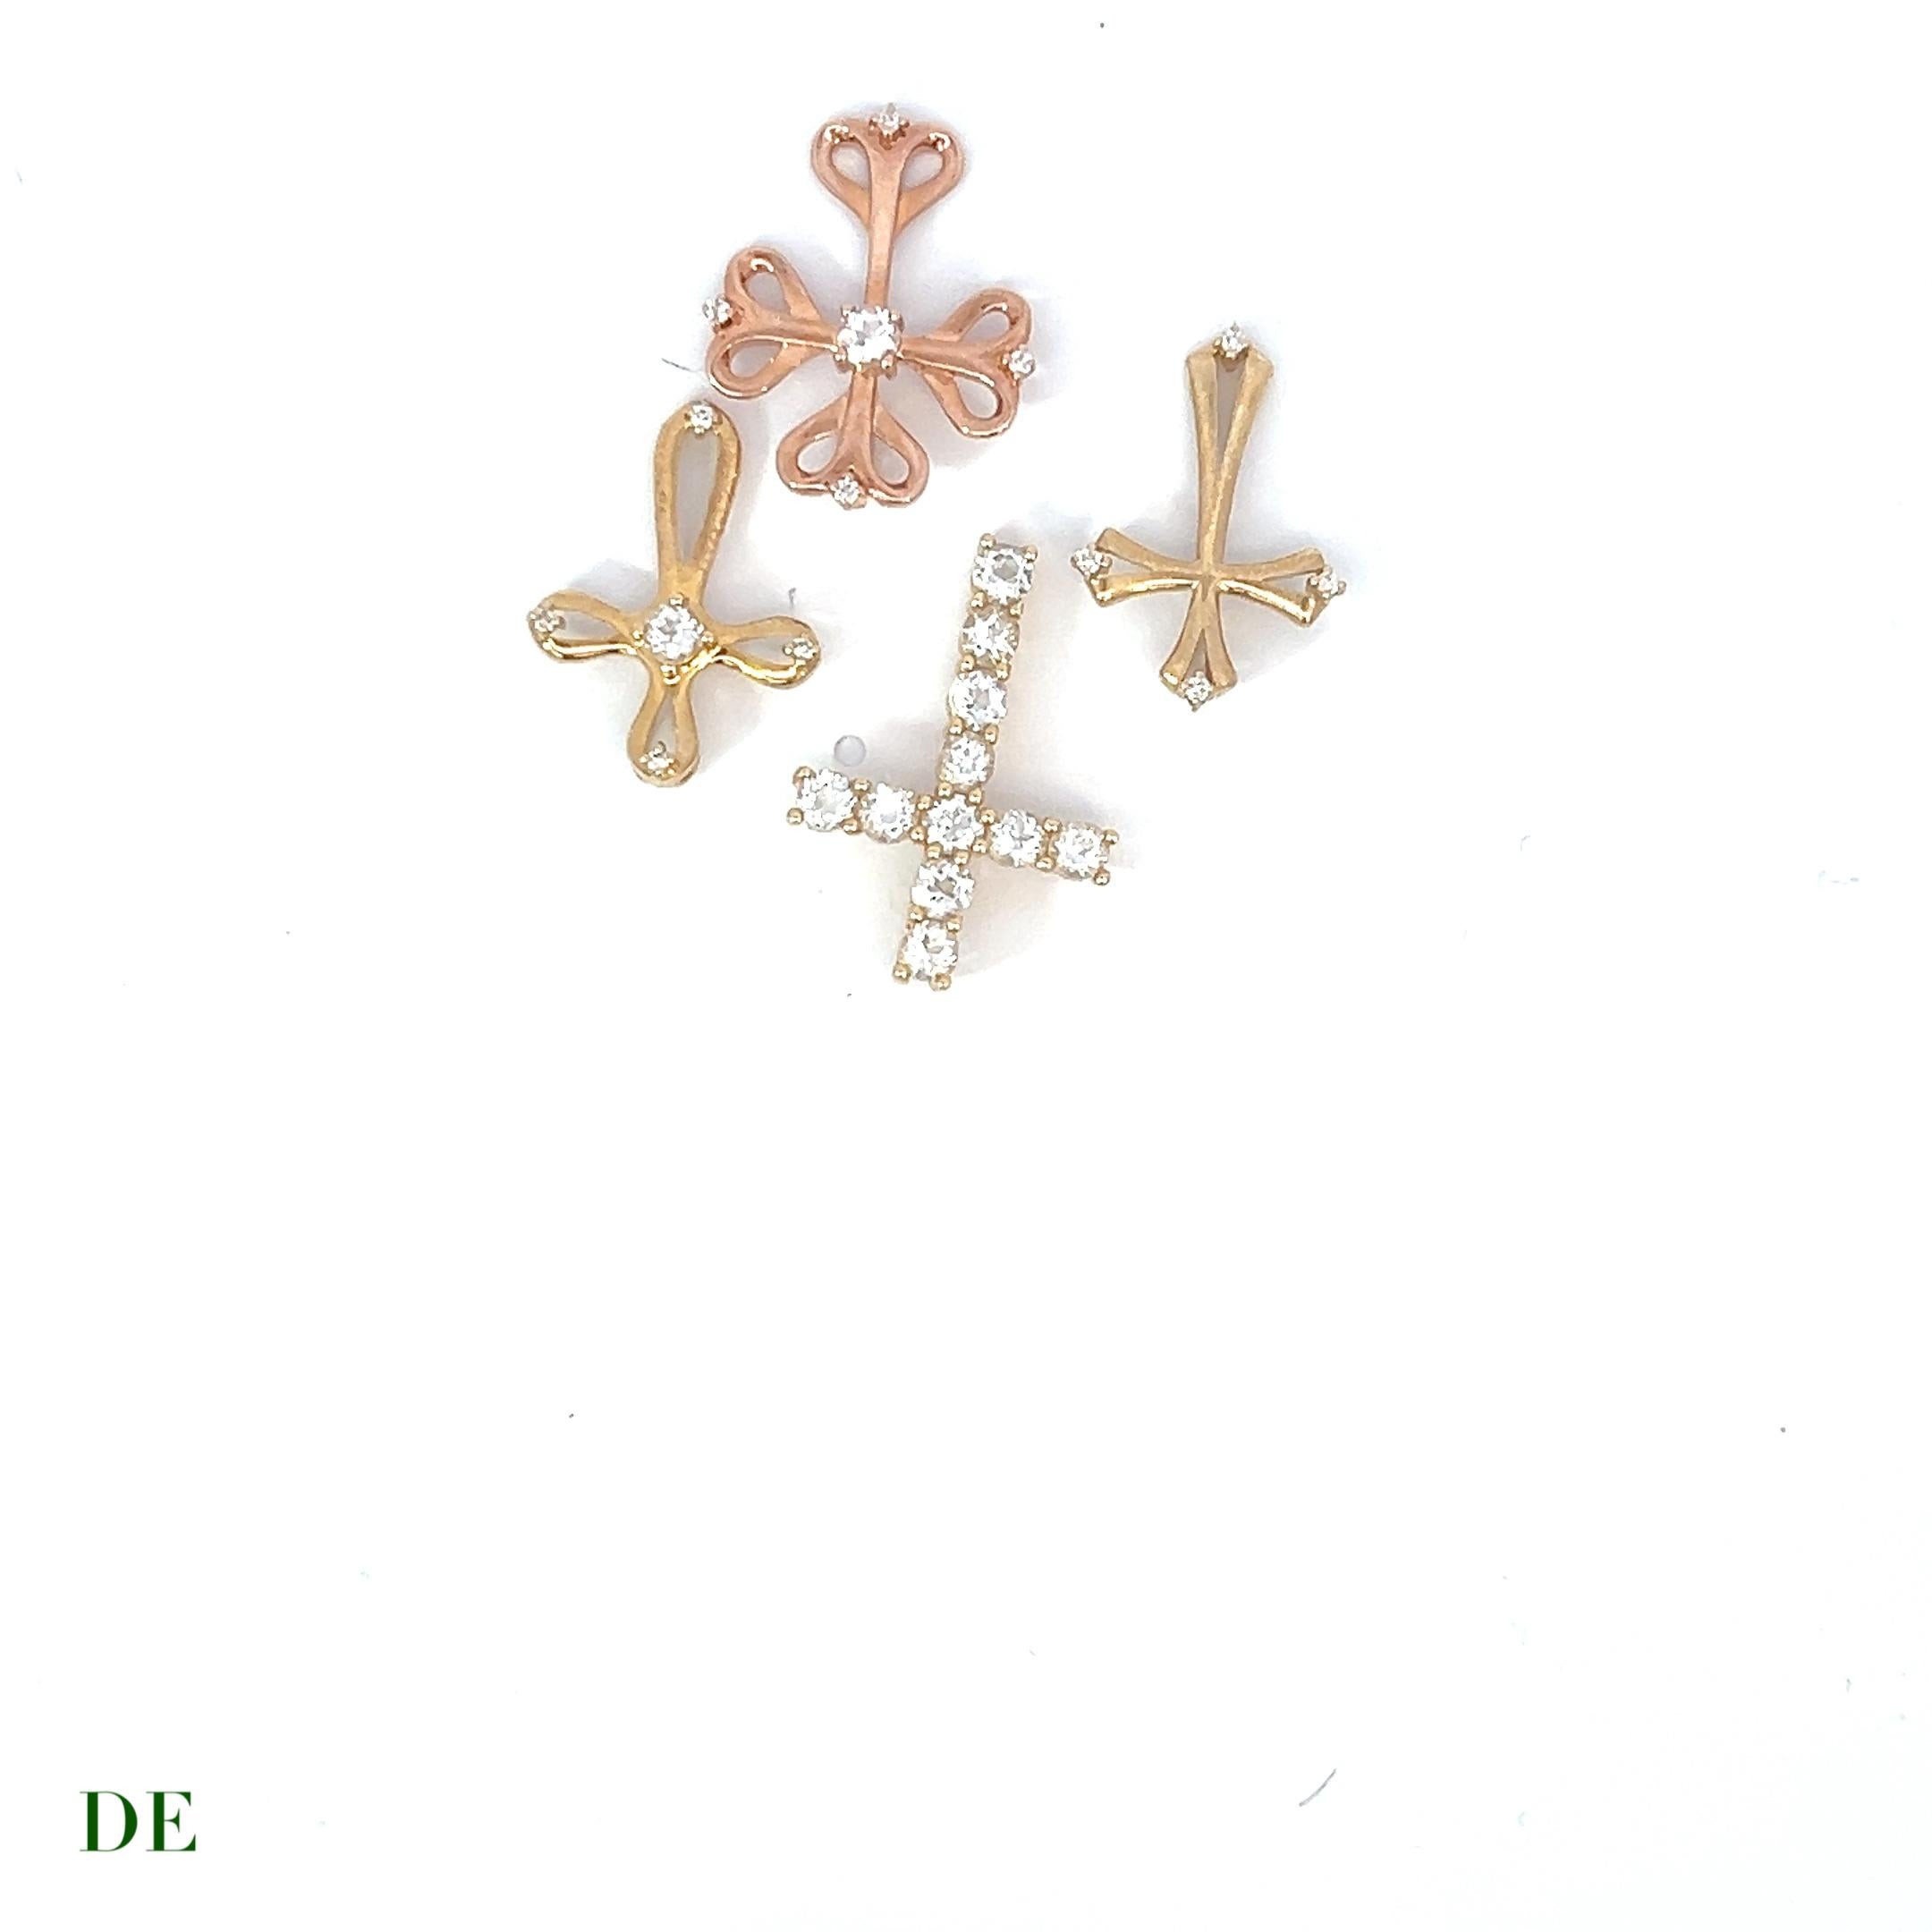 Brilliant Cut Family Cross Collection - 4 pcs of 14k Gold Cross with Diamonds and White Topaz